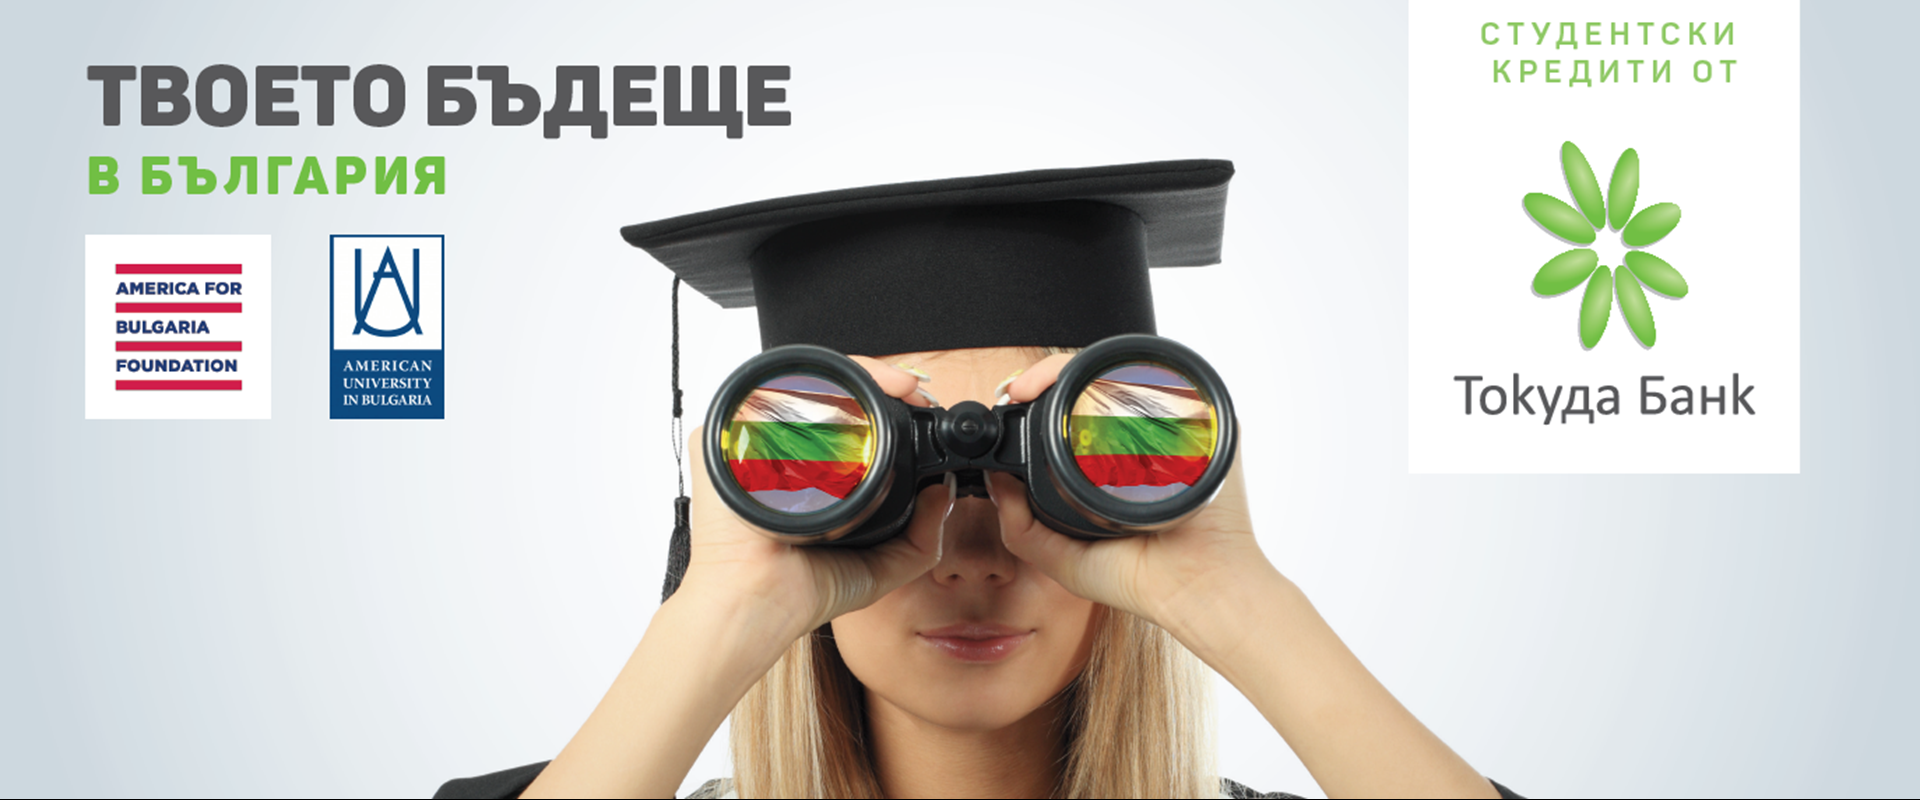 Your Future in Bulgaria: Tokuda Bank Offers ABF-Sponsored Forgivable Loans for AUBG Students